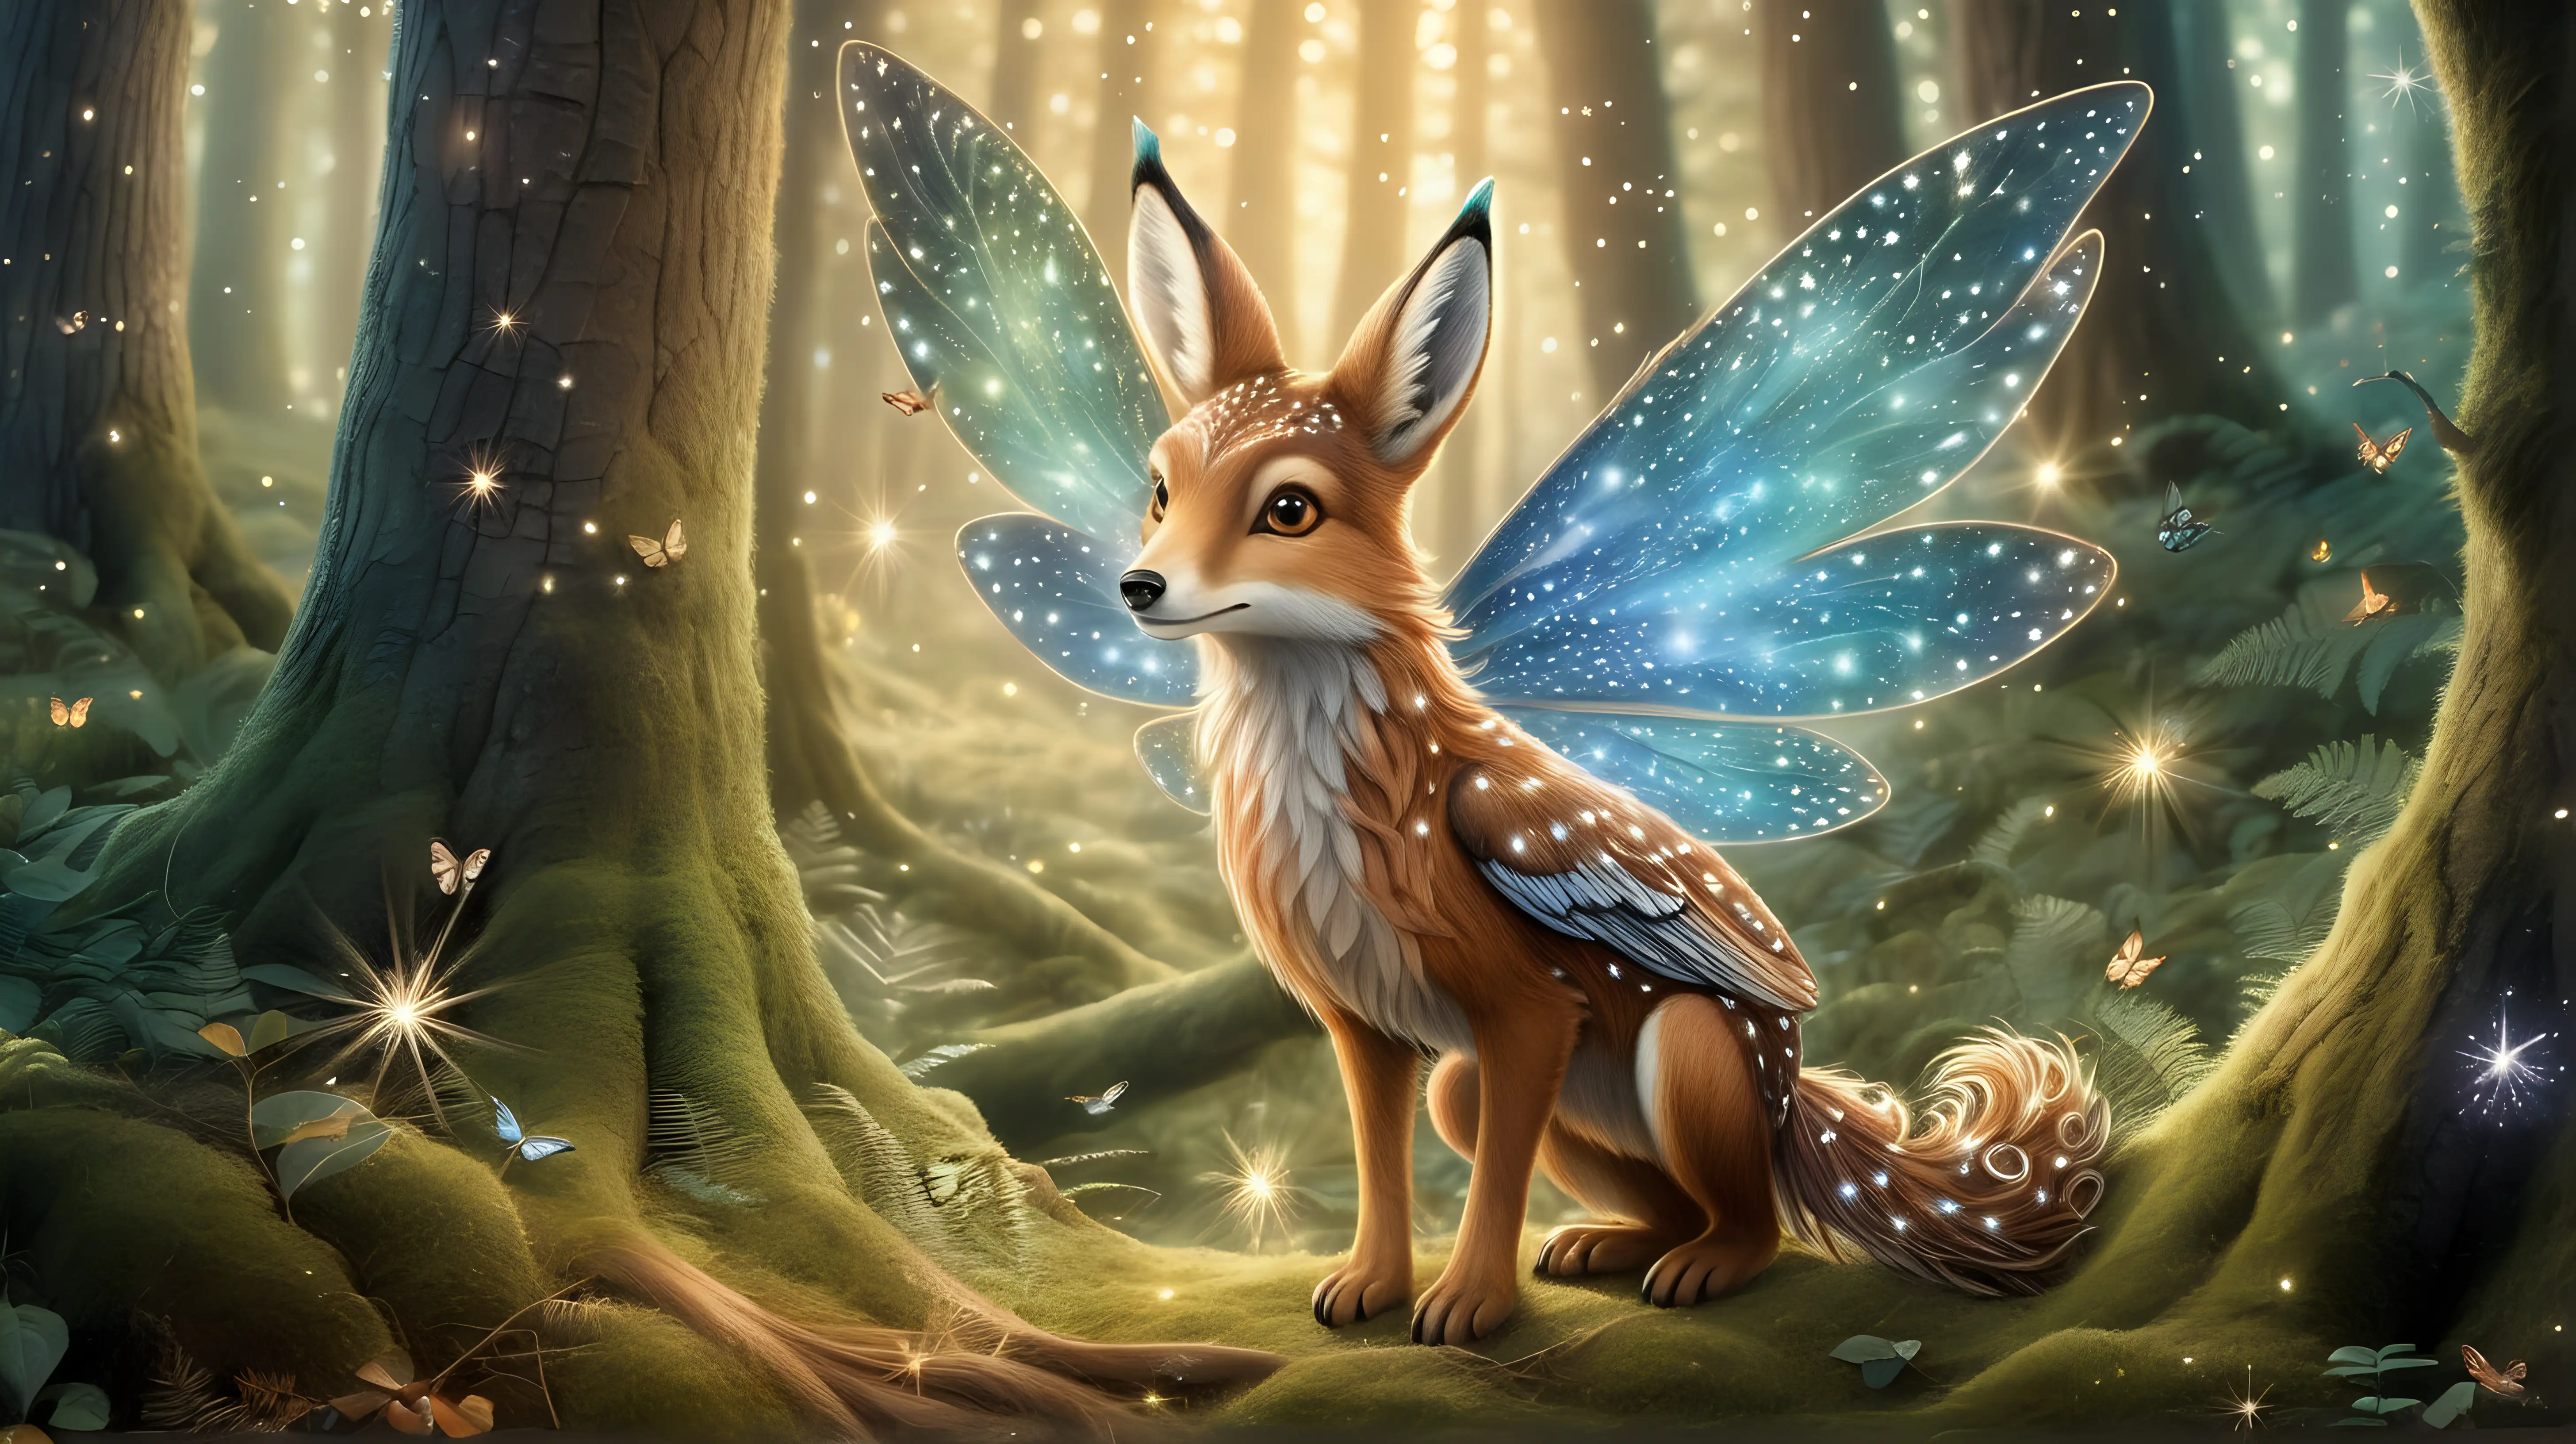 Enchanting Forest Creature with Stardust Wings